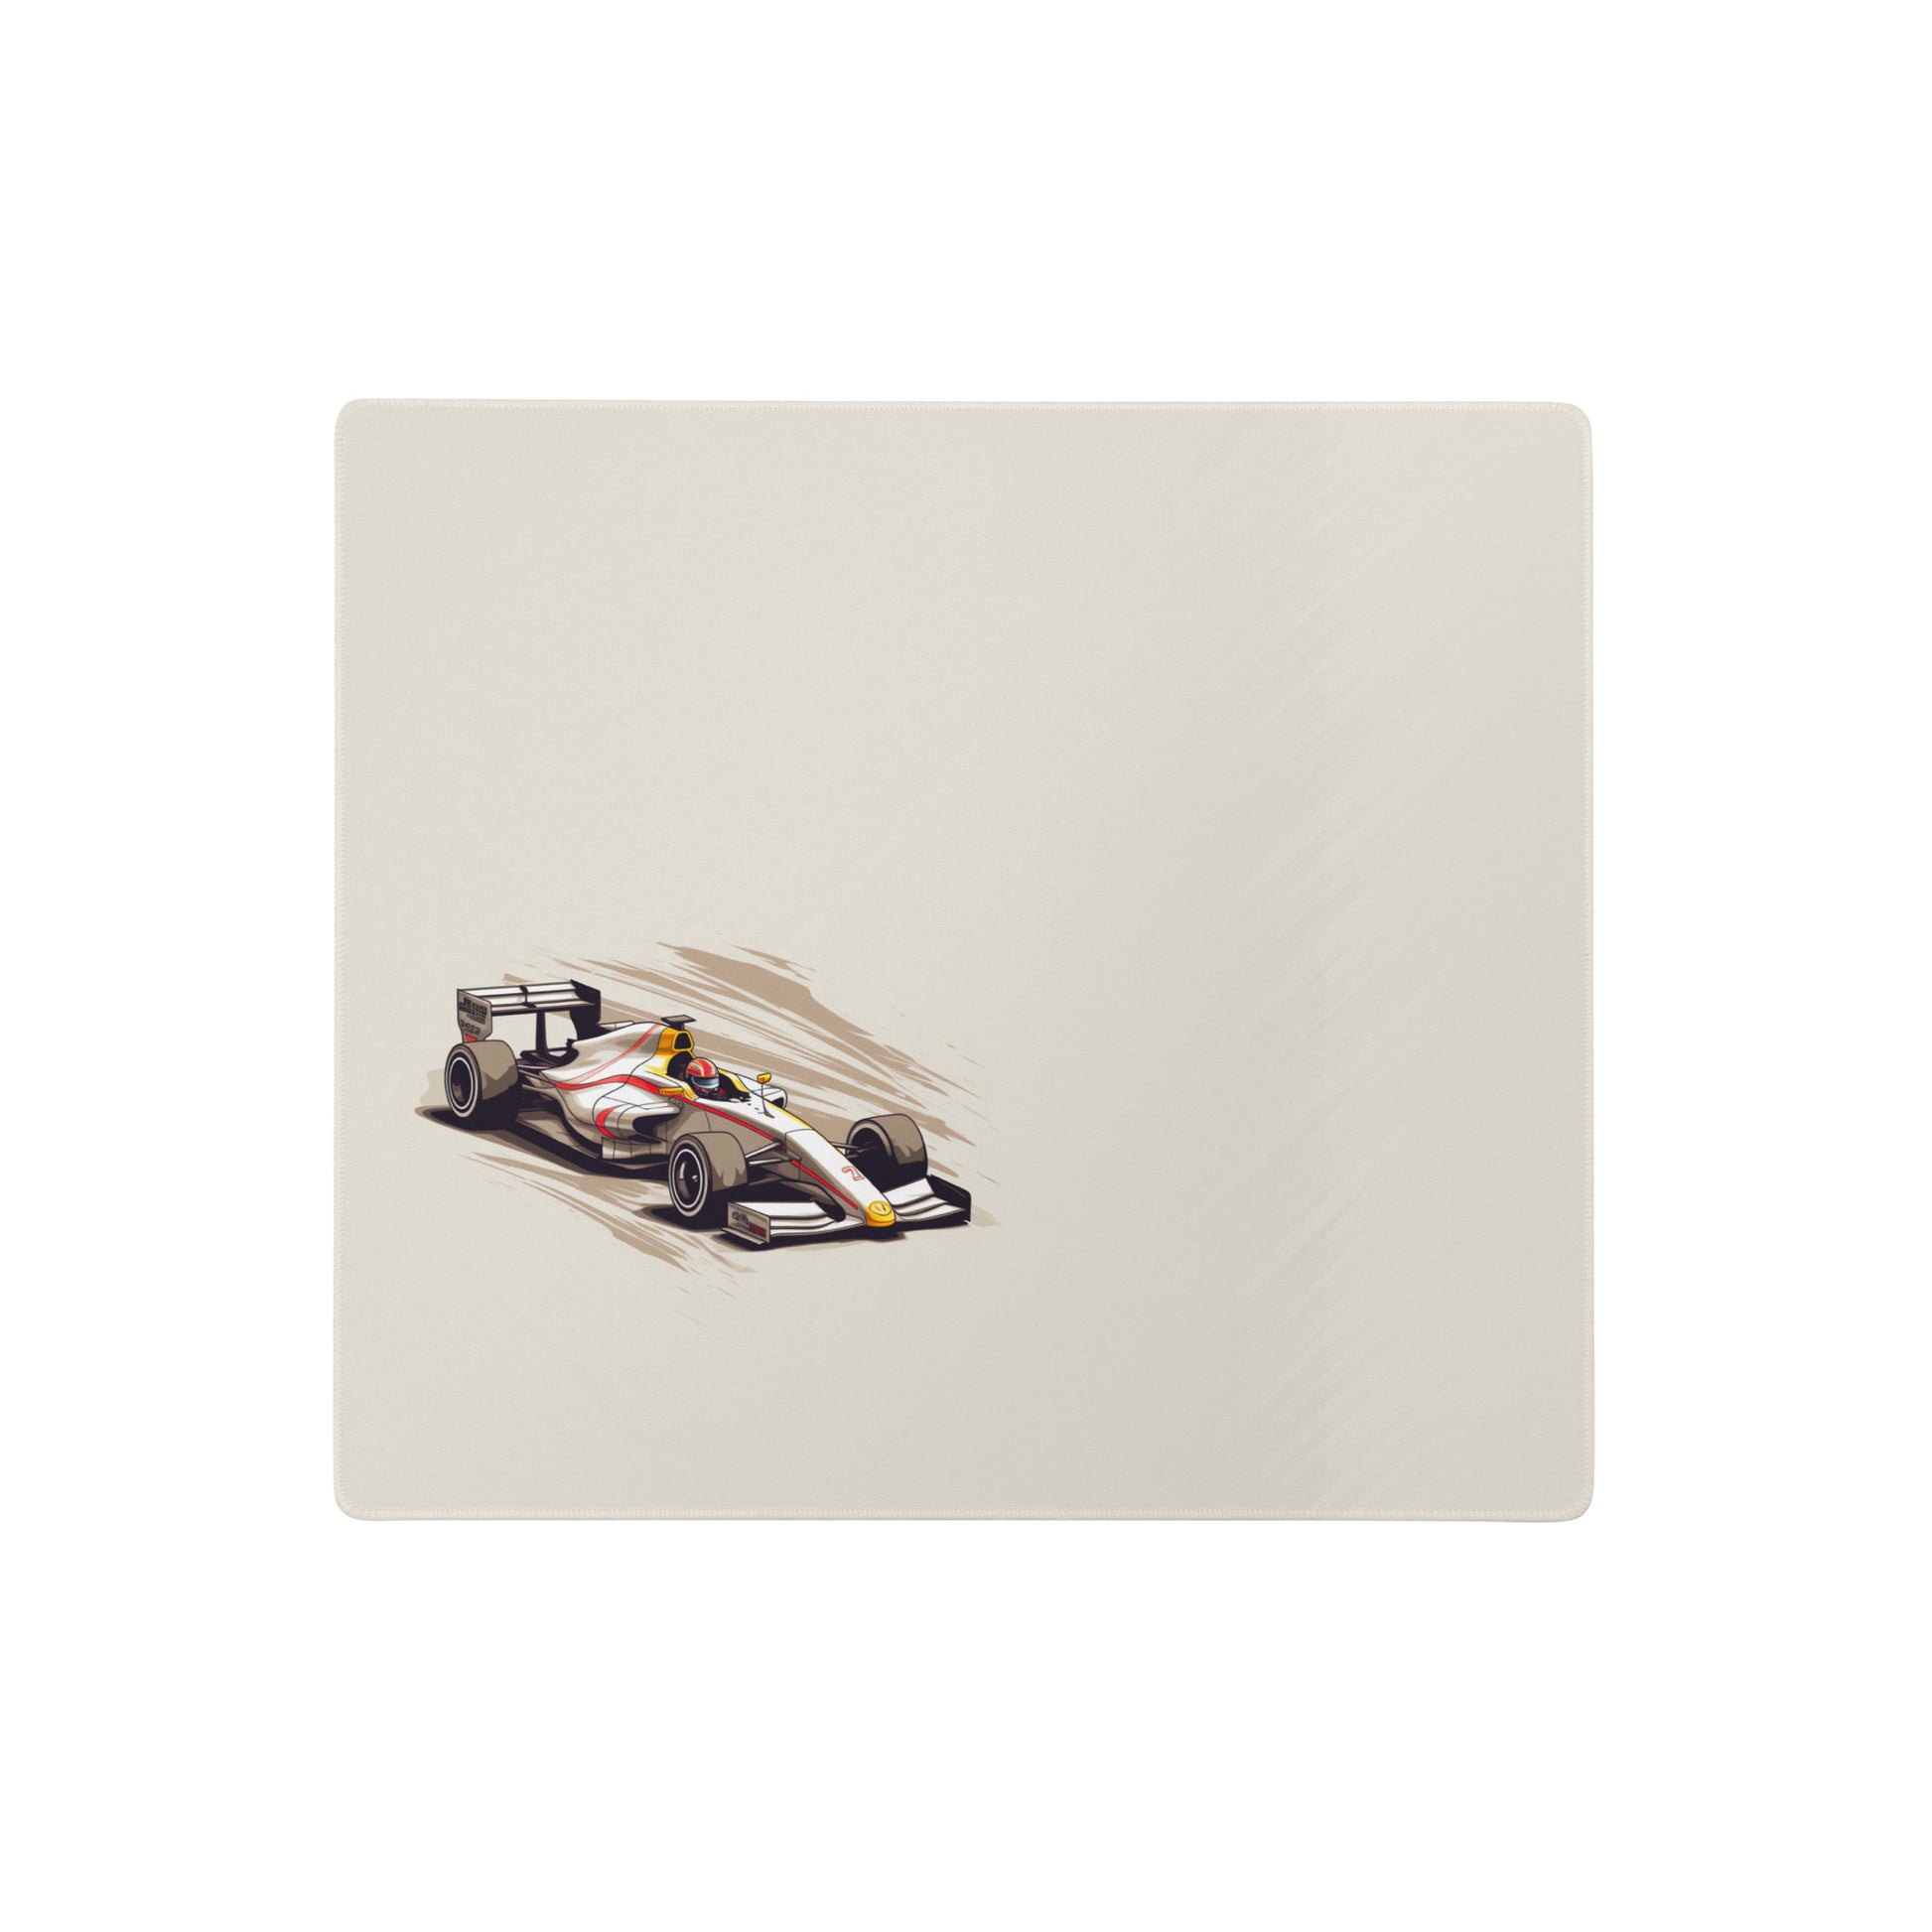 An 18" x 16" mouse pad with a fast formula one car  on the  left side. Beige in color. 